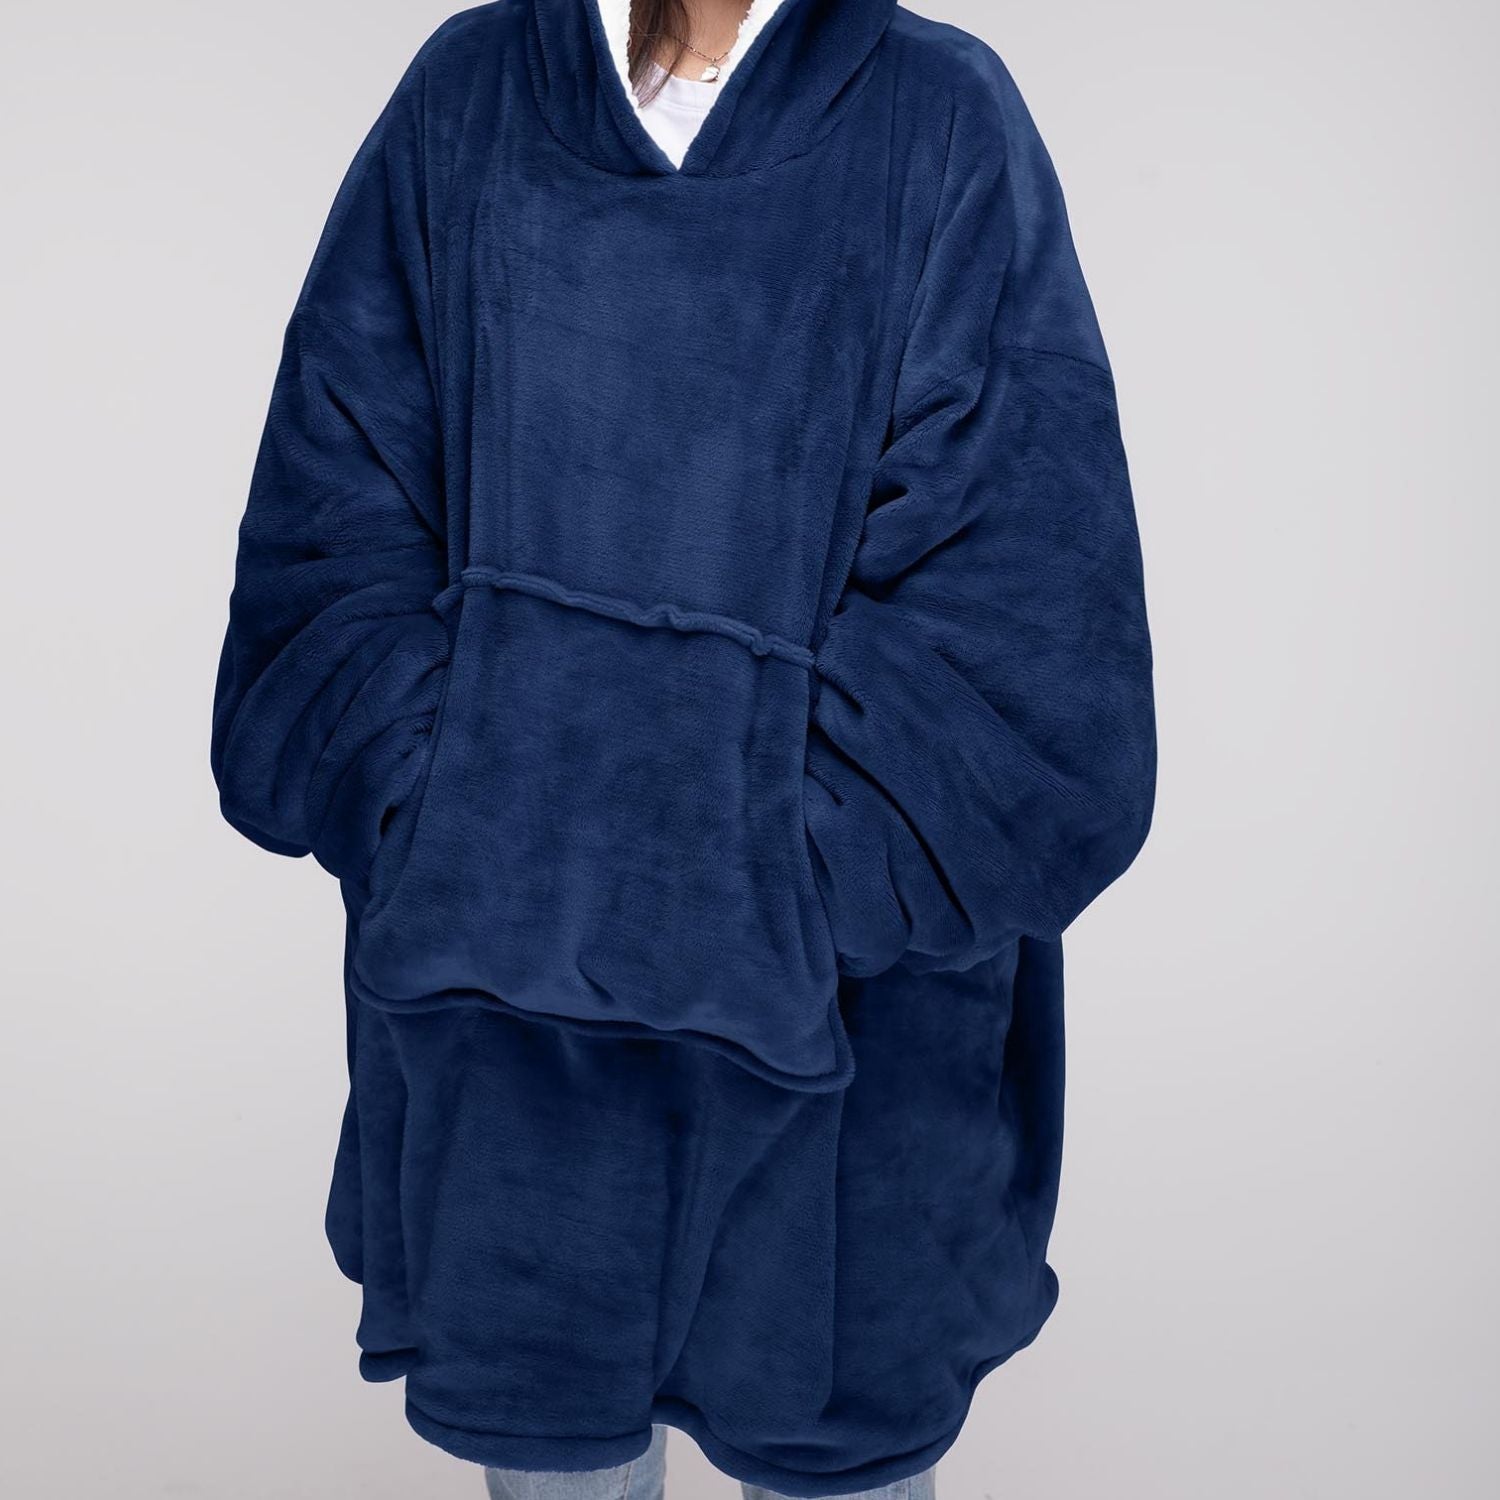 The Home Bedroom Cosy Robe - Navy 2 Shaws Department Stores